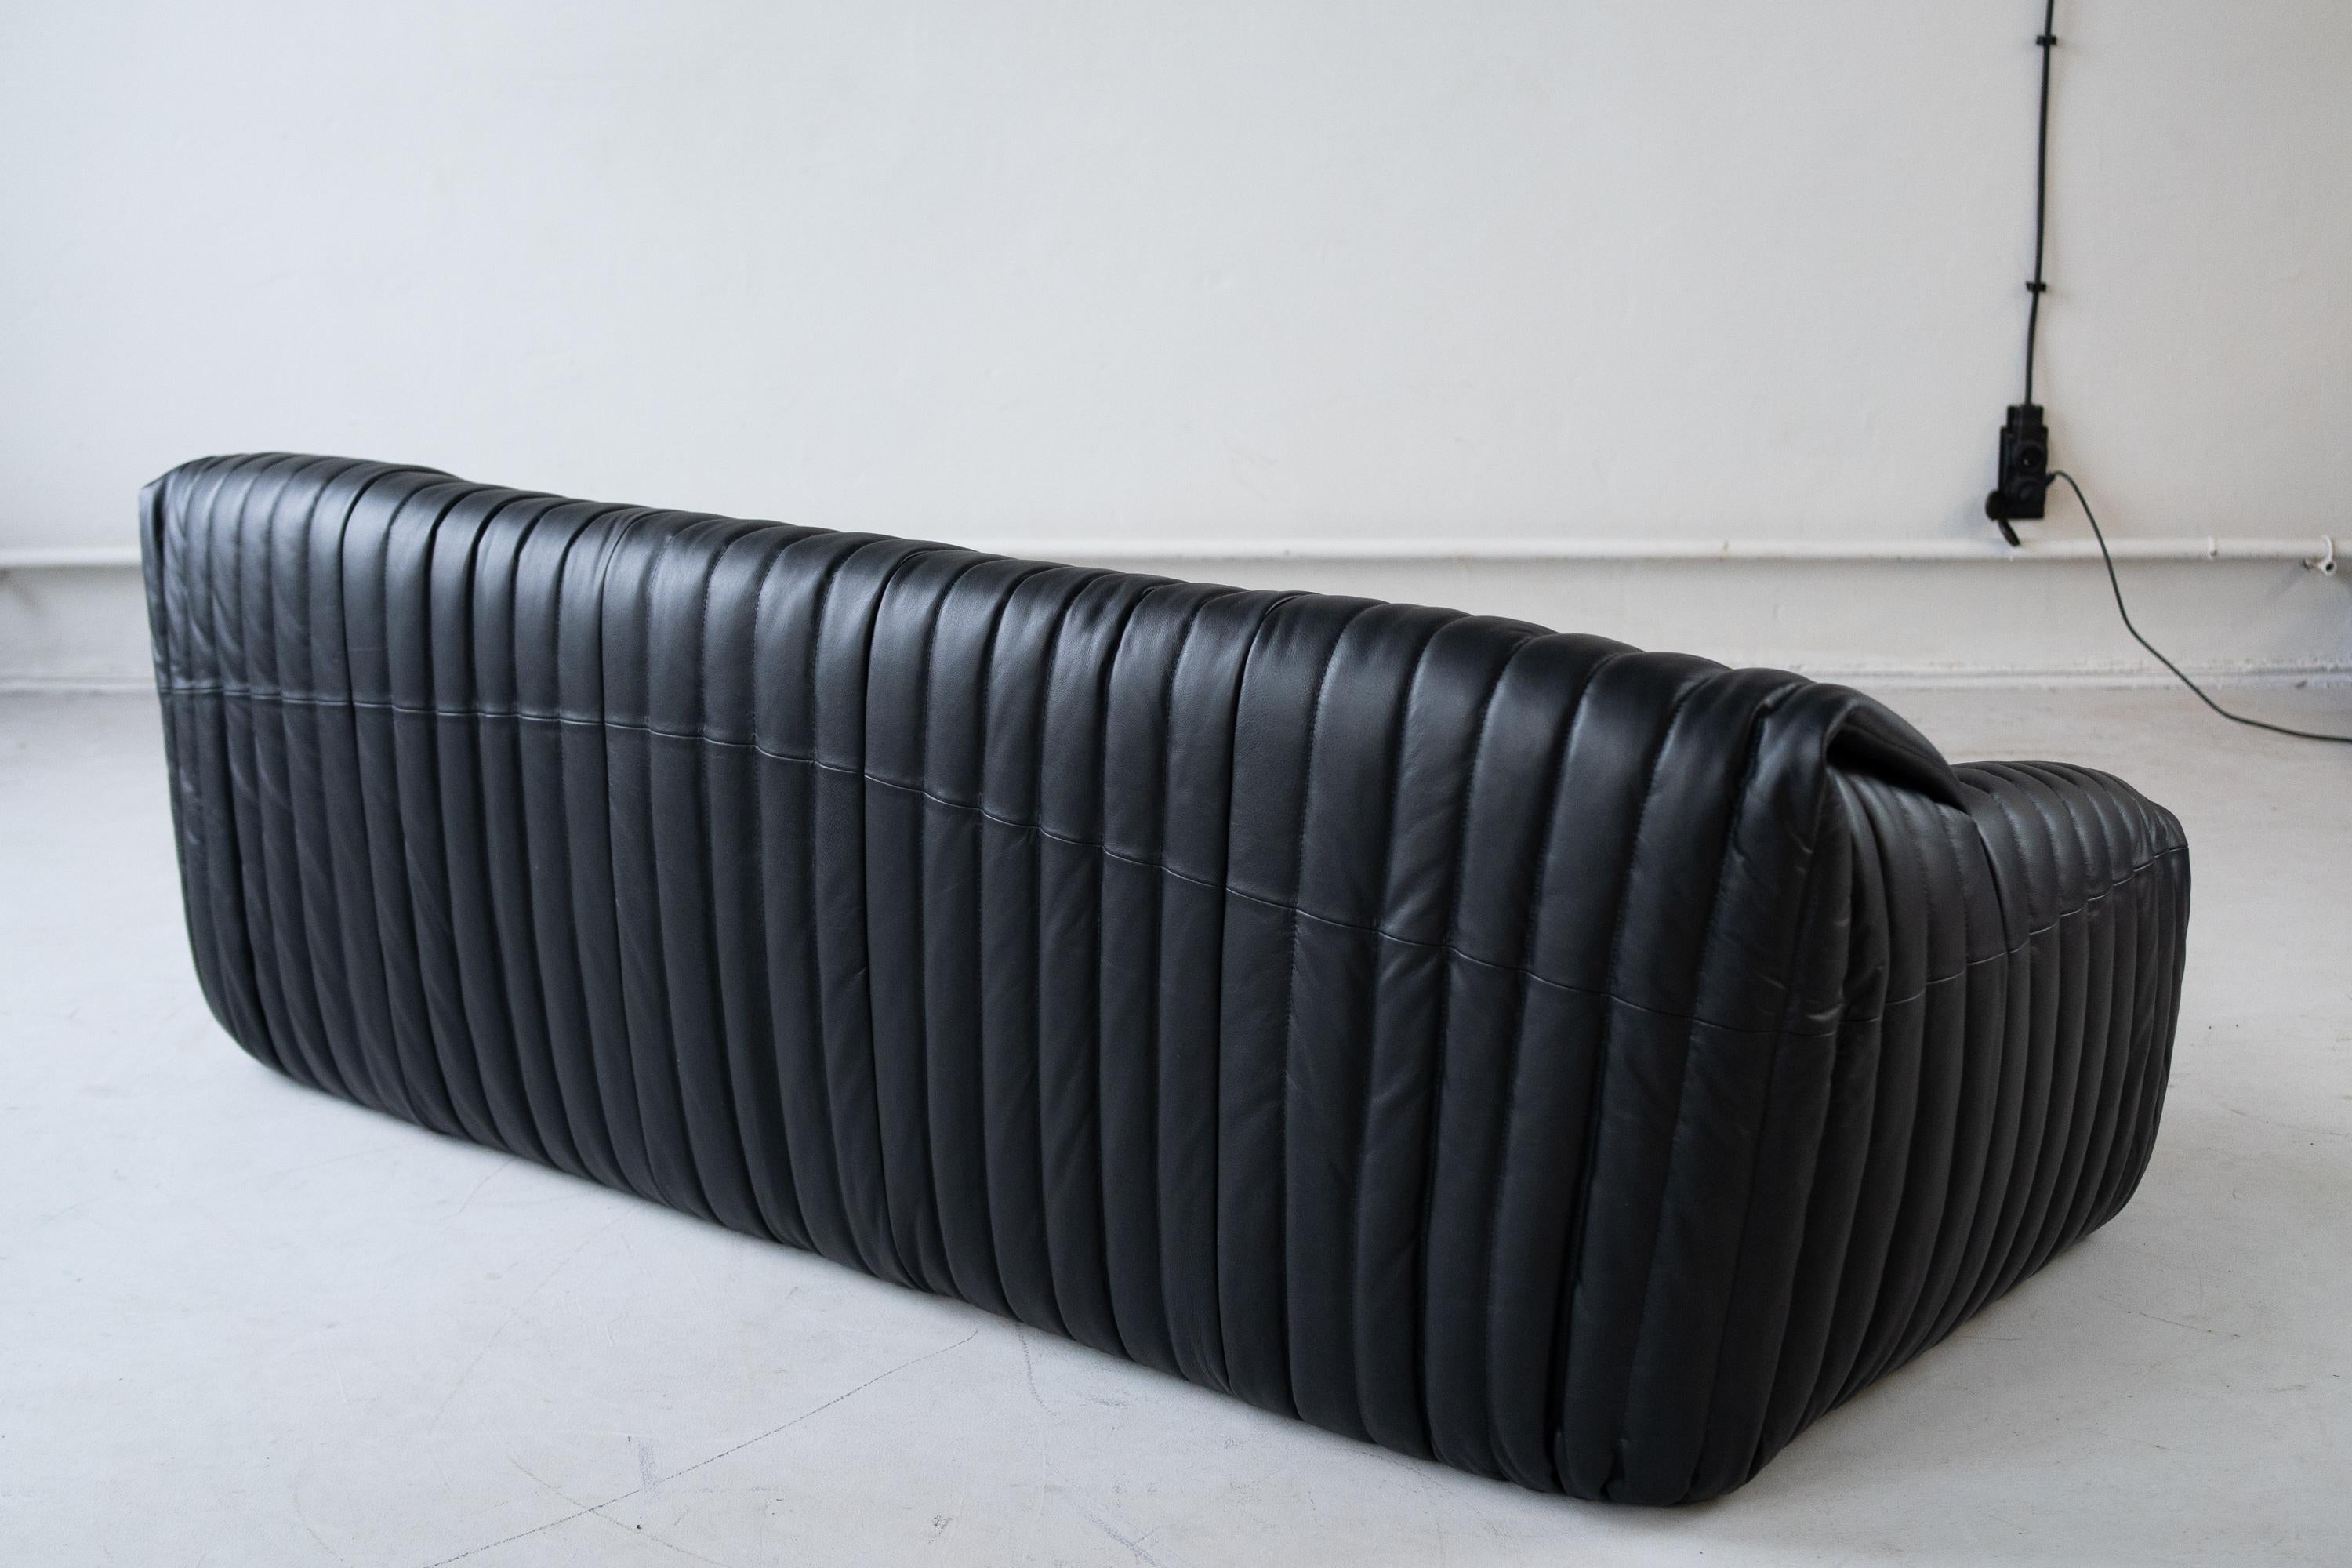  Sandra sofa  designed by Annie Hiéronimus for Cinna after she joined the Roset Bureau d’Etudes in 1976. 
Set of 3 seater , 1 seater and 1 seater. black leather upholstery.
 The inside of the sofa consists entirely of polyether foam and is,